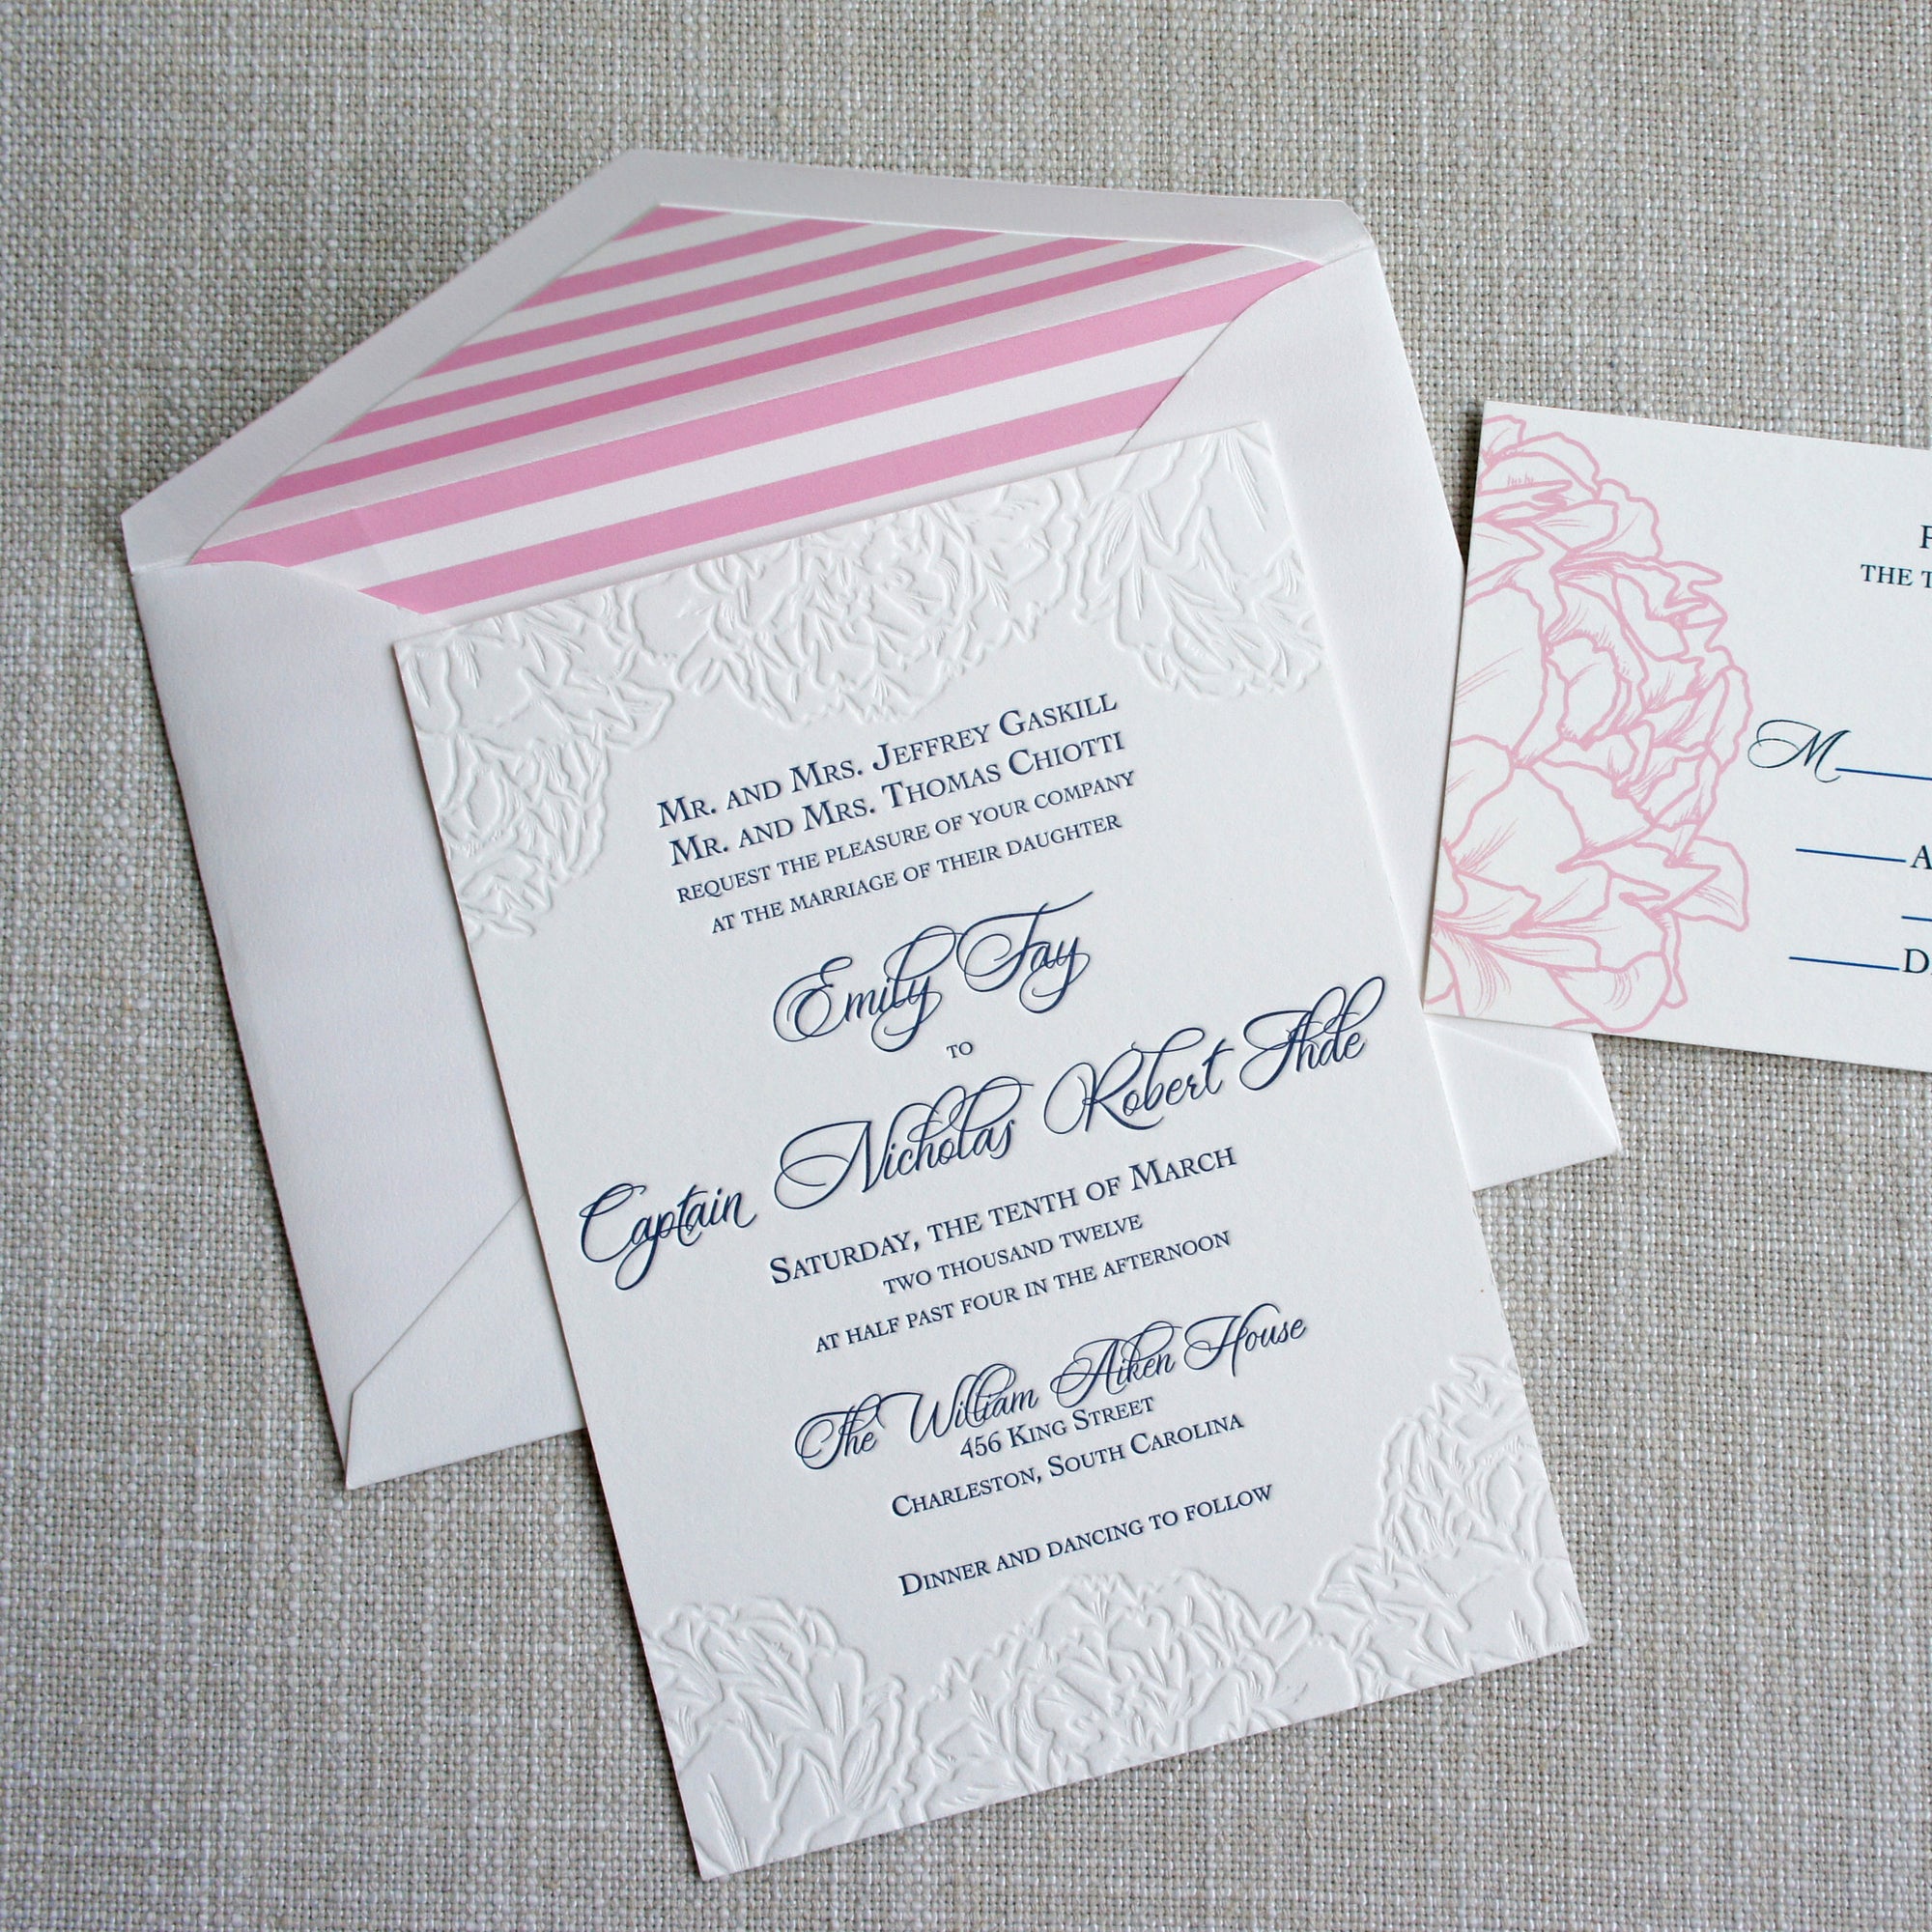 Peony Wedding Invitation with navy and link ink letterpress. Peony details and pink stripe envelope liner.